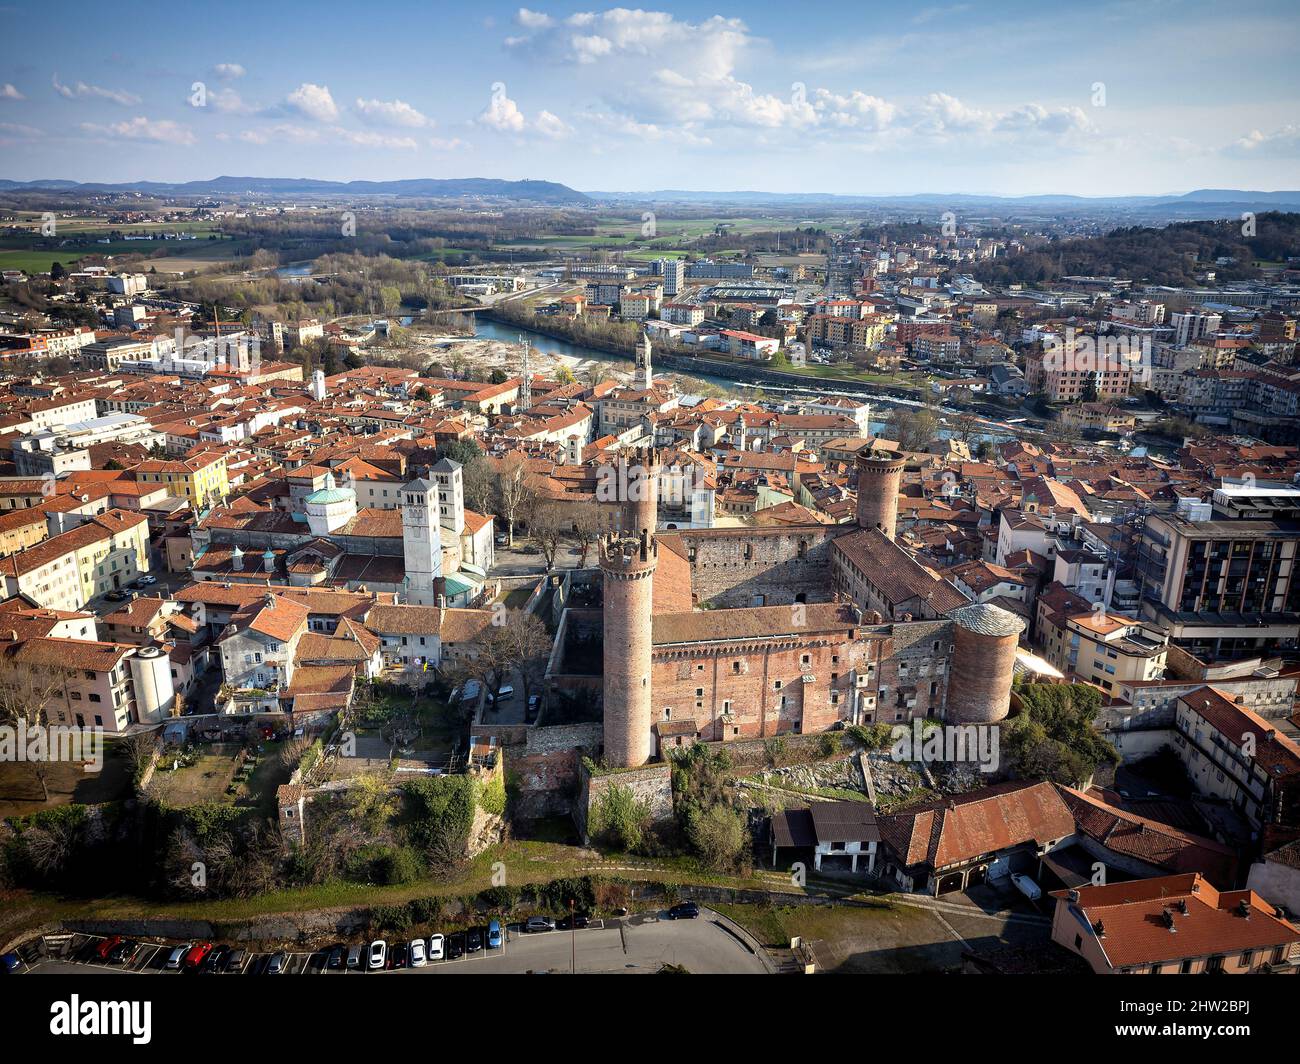 Aerial view of the historic centre with the Castle with its red towers in the foreground. Ivrea, Italy - March 2021 Stock Photo